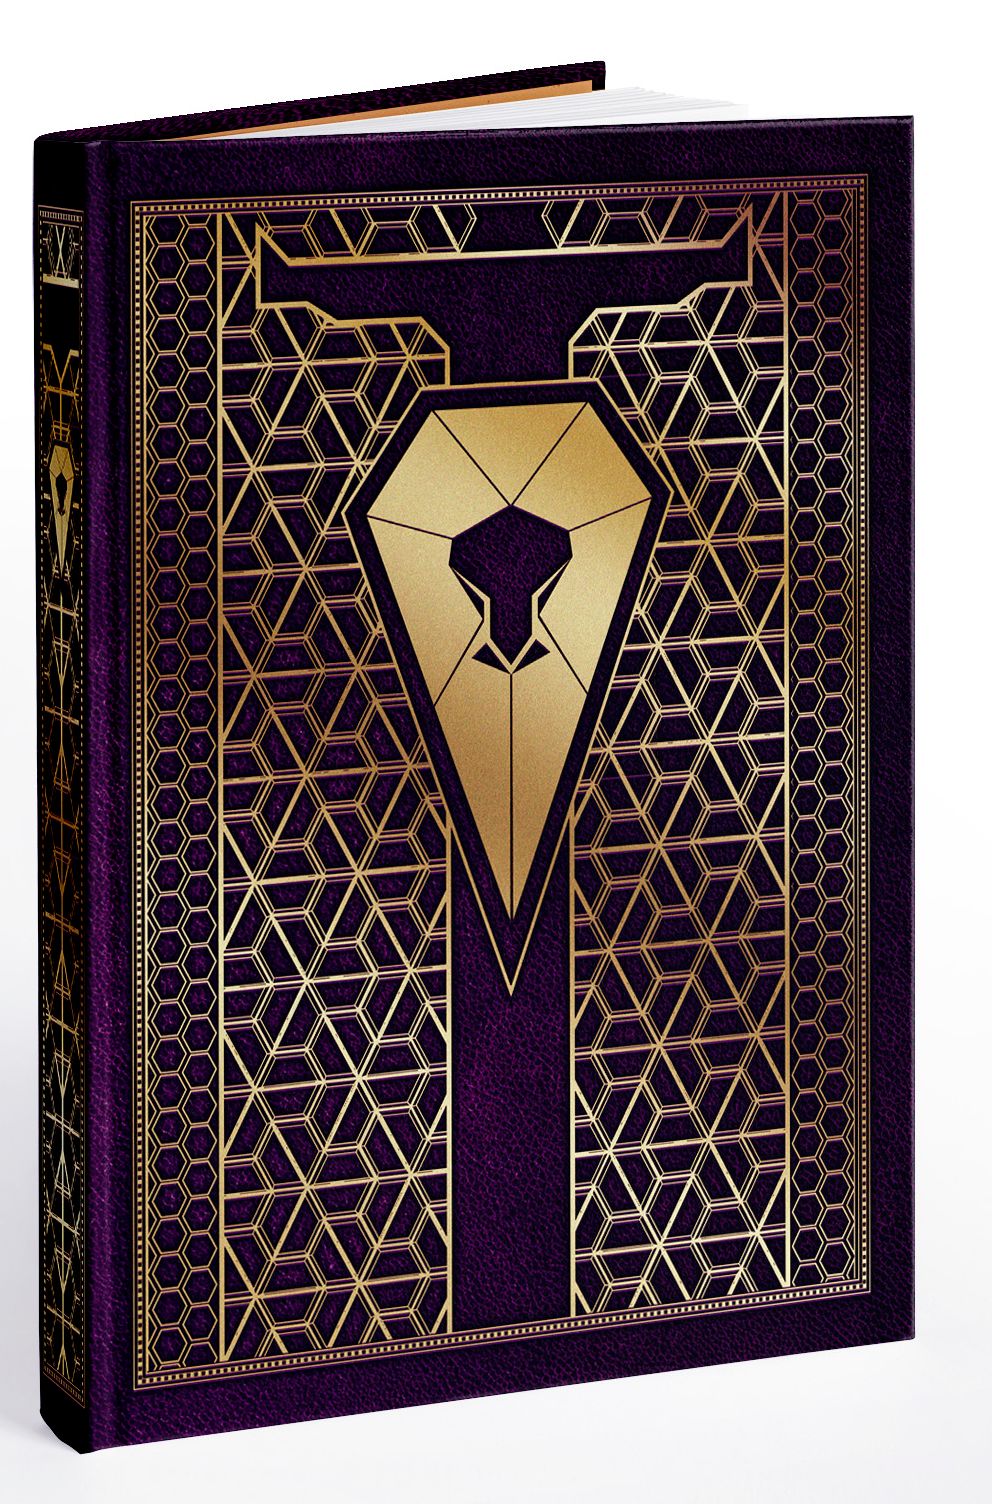 Dune RPG: Corrino Collector's Edition Core Rulebook - The Compleat Strategist